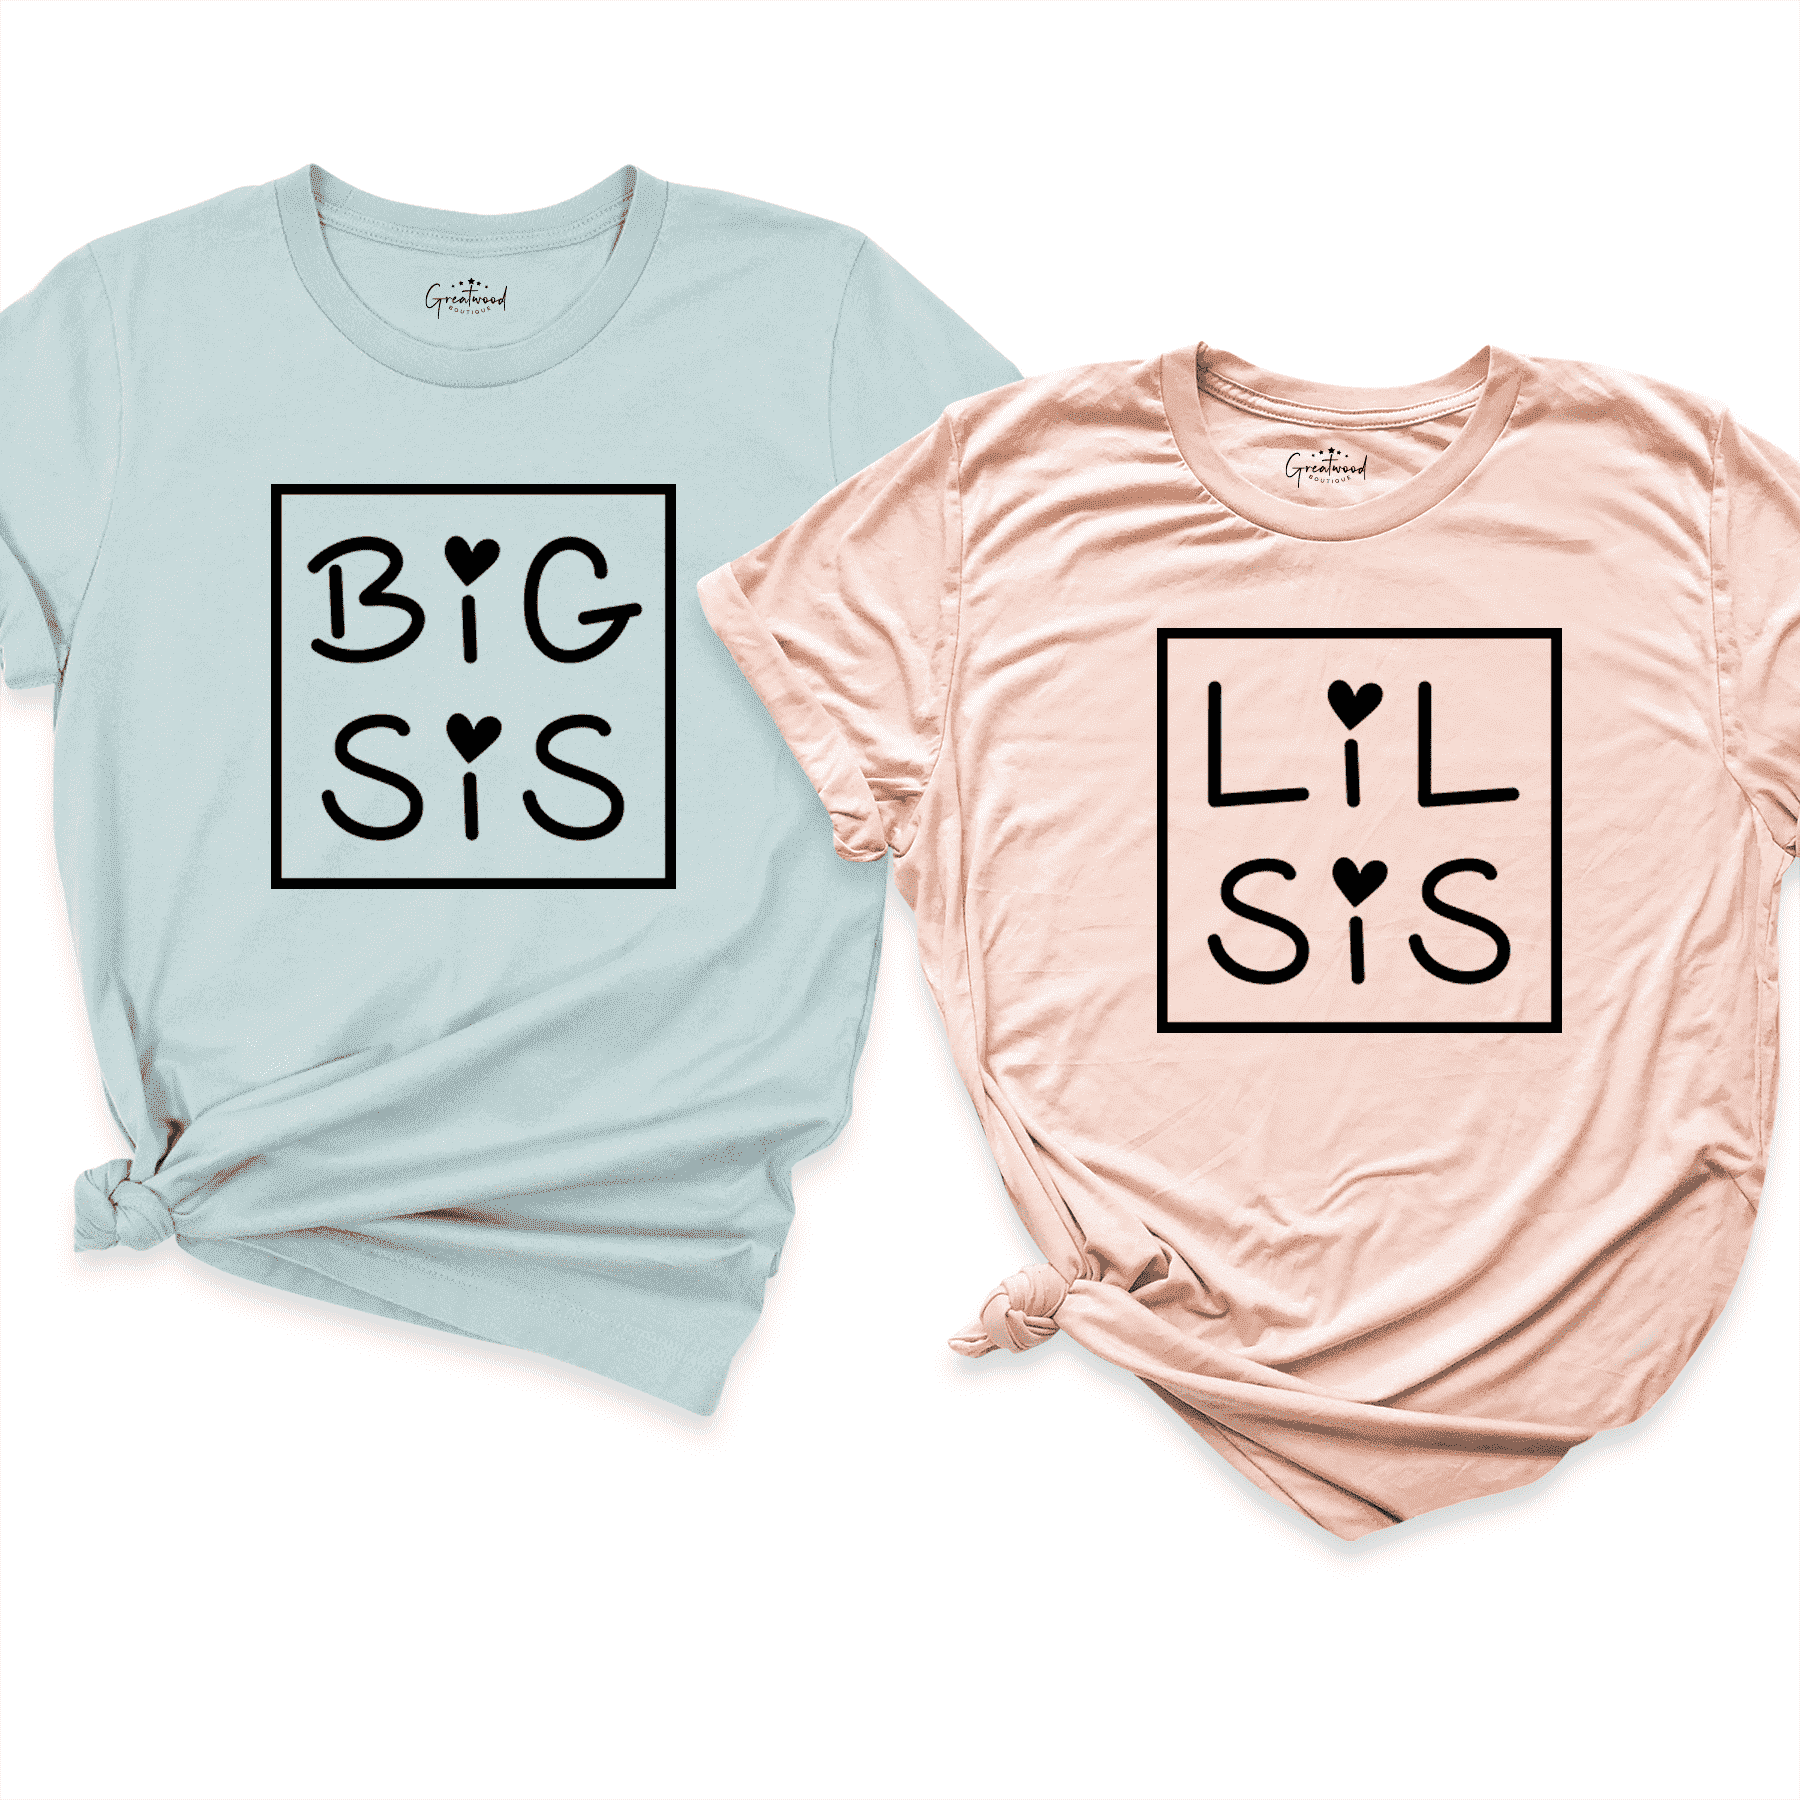 Big & Lil Sister Shirt Blue - Greatwood Boutique